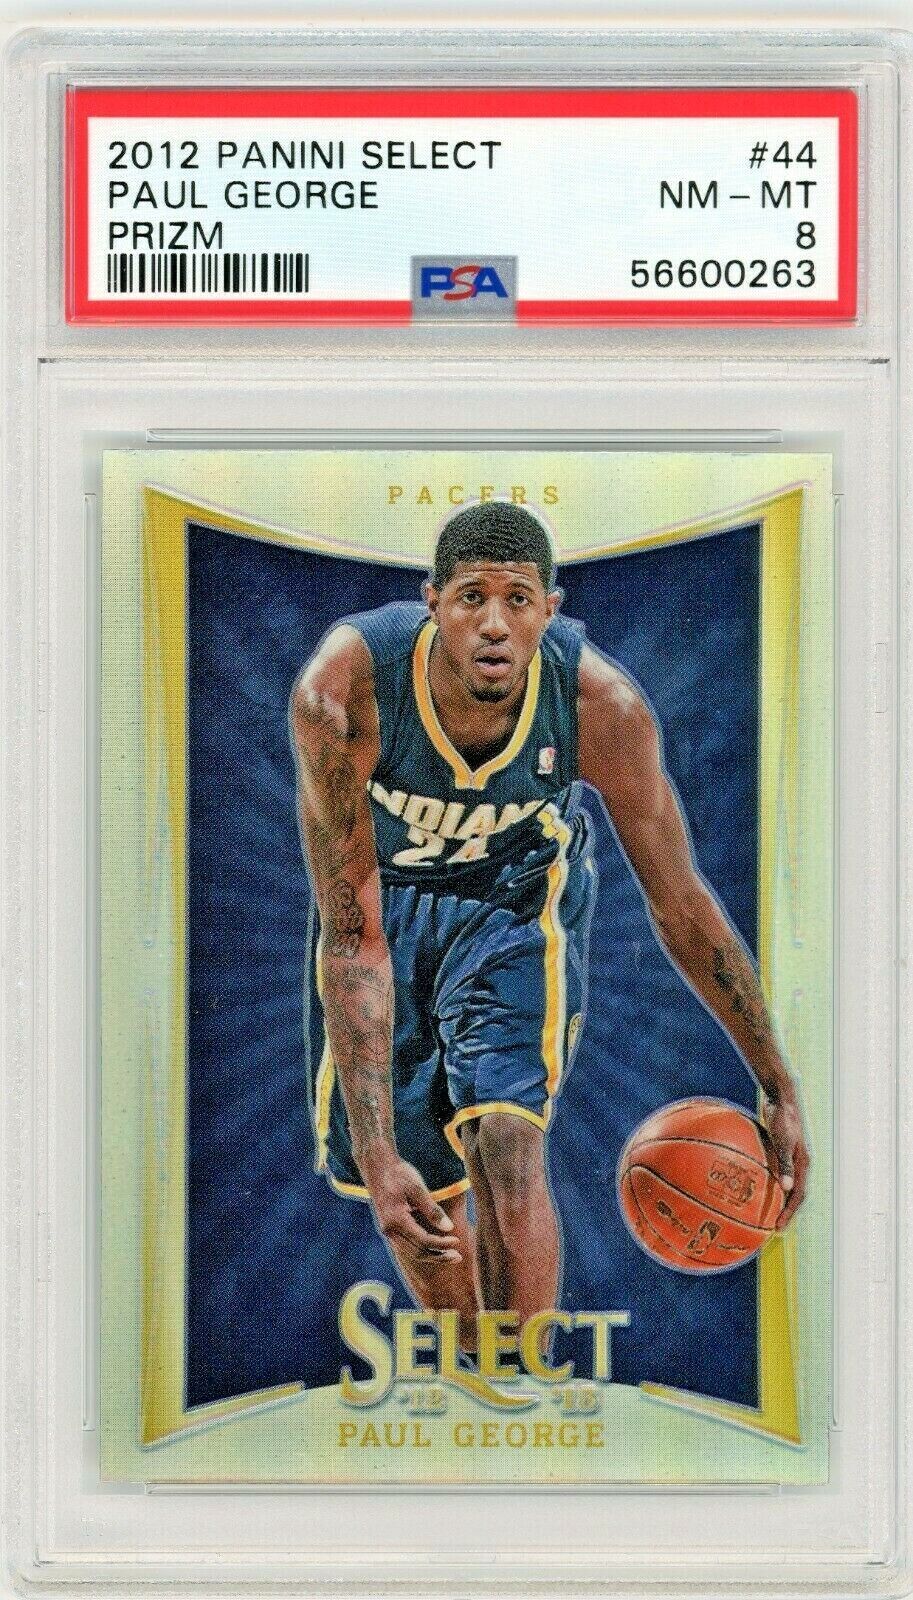 PAUL GEORGE 2012-13 Panini Select Silver Prizm #44 PSA 8 Indiana Pacers